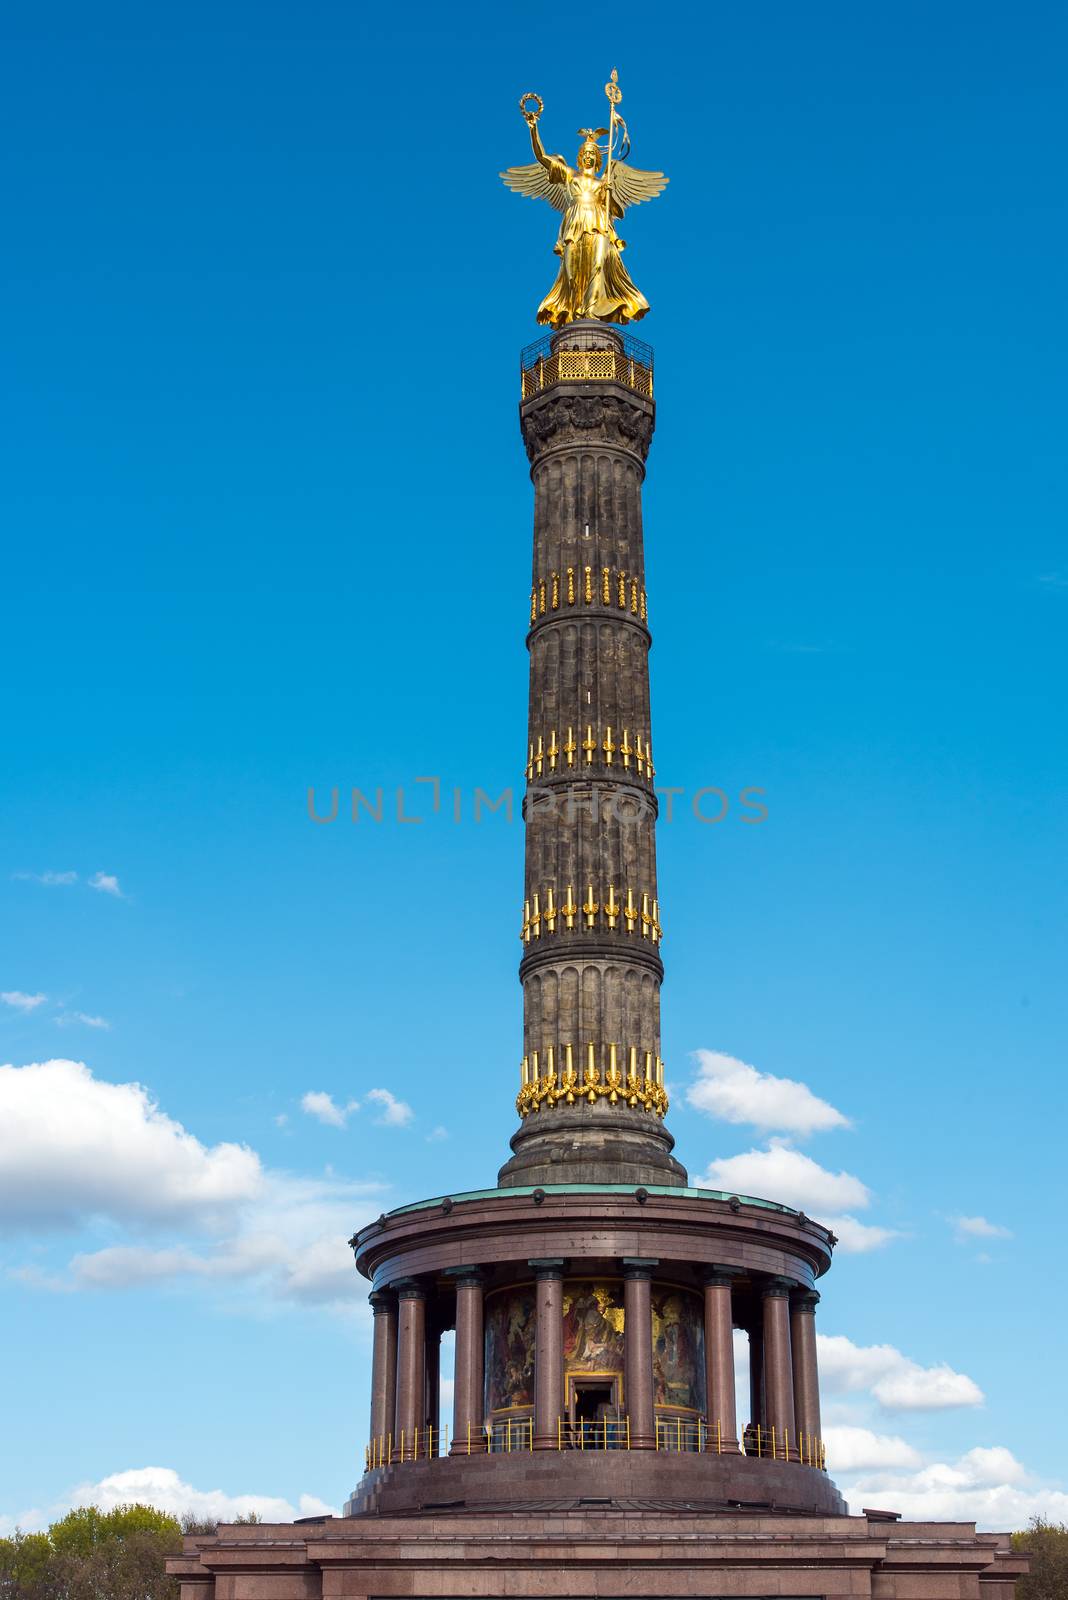 The famous Statue of victory in Berlin, Germany